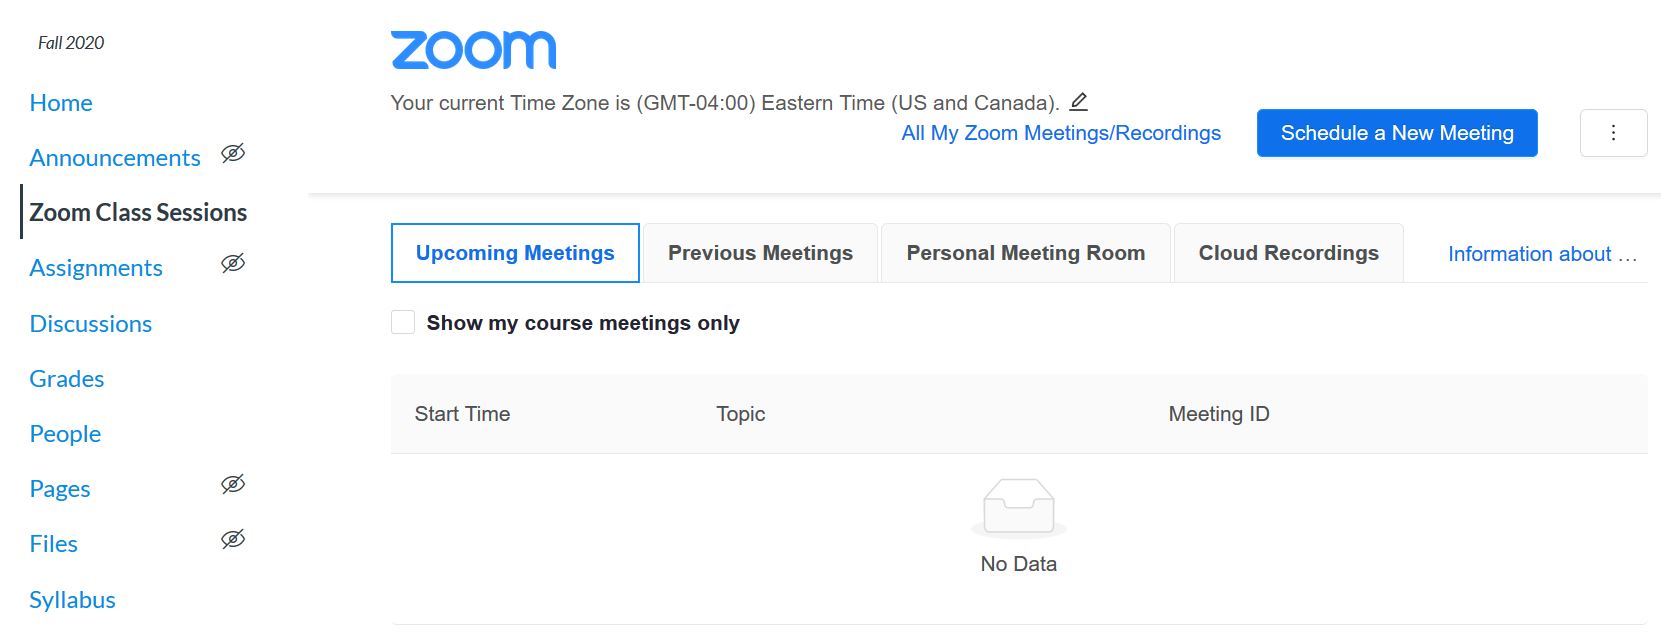 Zoom_class_session_scheduling.JPG